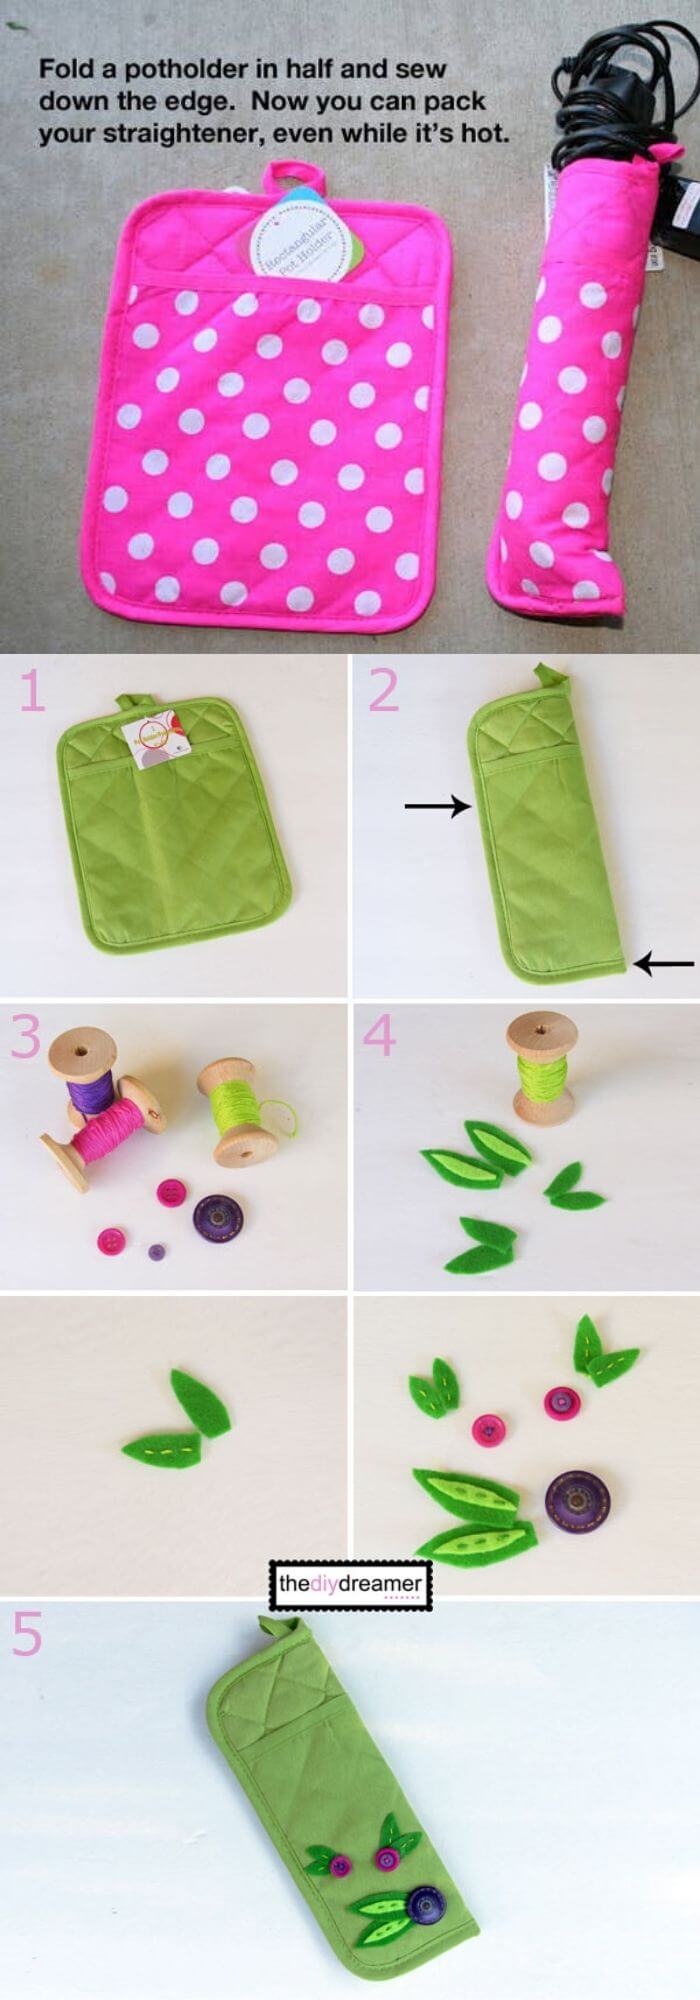 8 clever diy projects